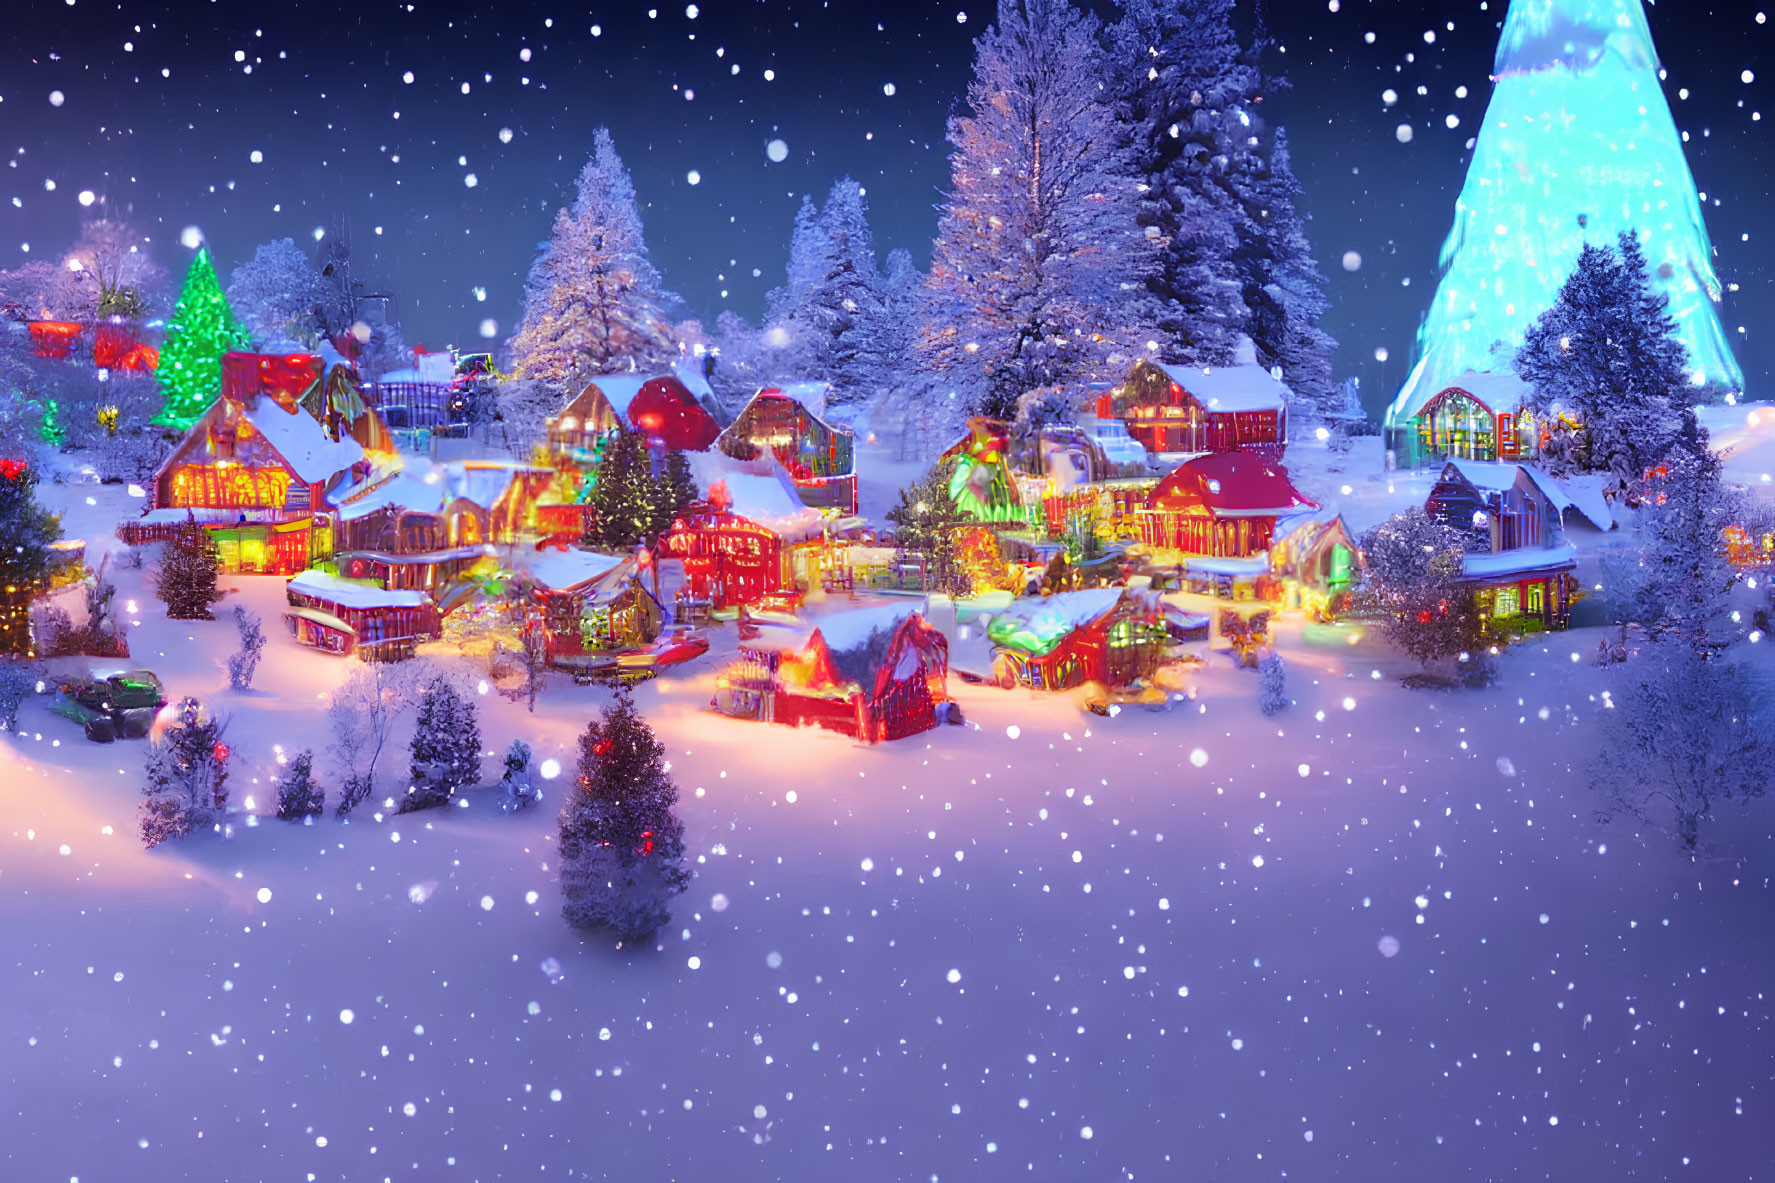 Colorful snowy village with illuminated houses and Christmas tree at night